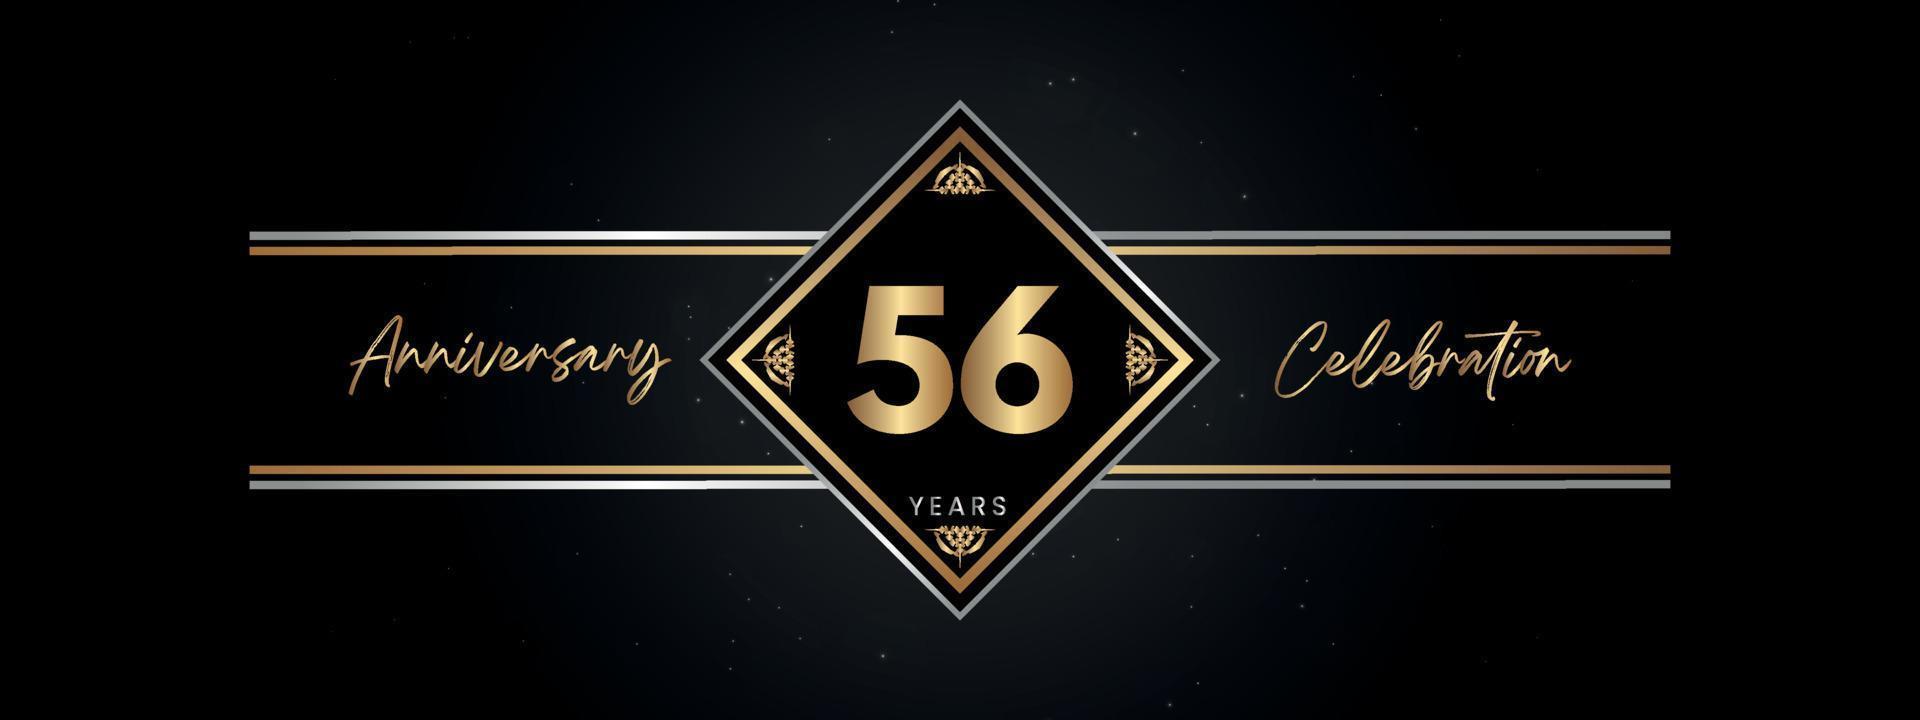 56 years anniversary golden color with decorative frame isolated on black background for anniversary celebration event, birthday party, brochure, greeting card. 56 Year Anniversary Template Design vector